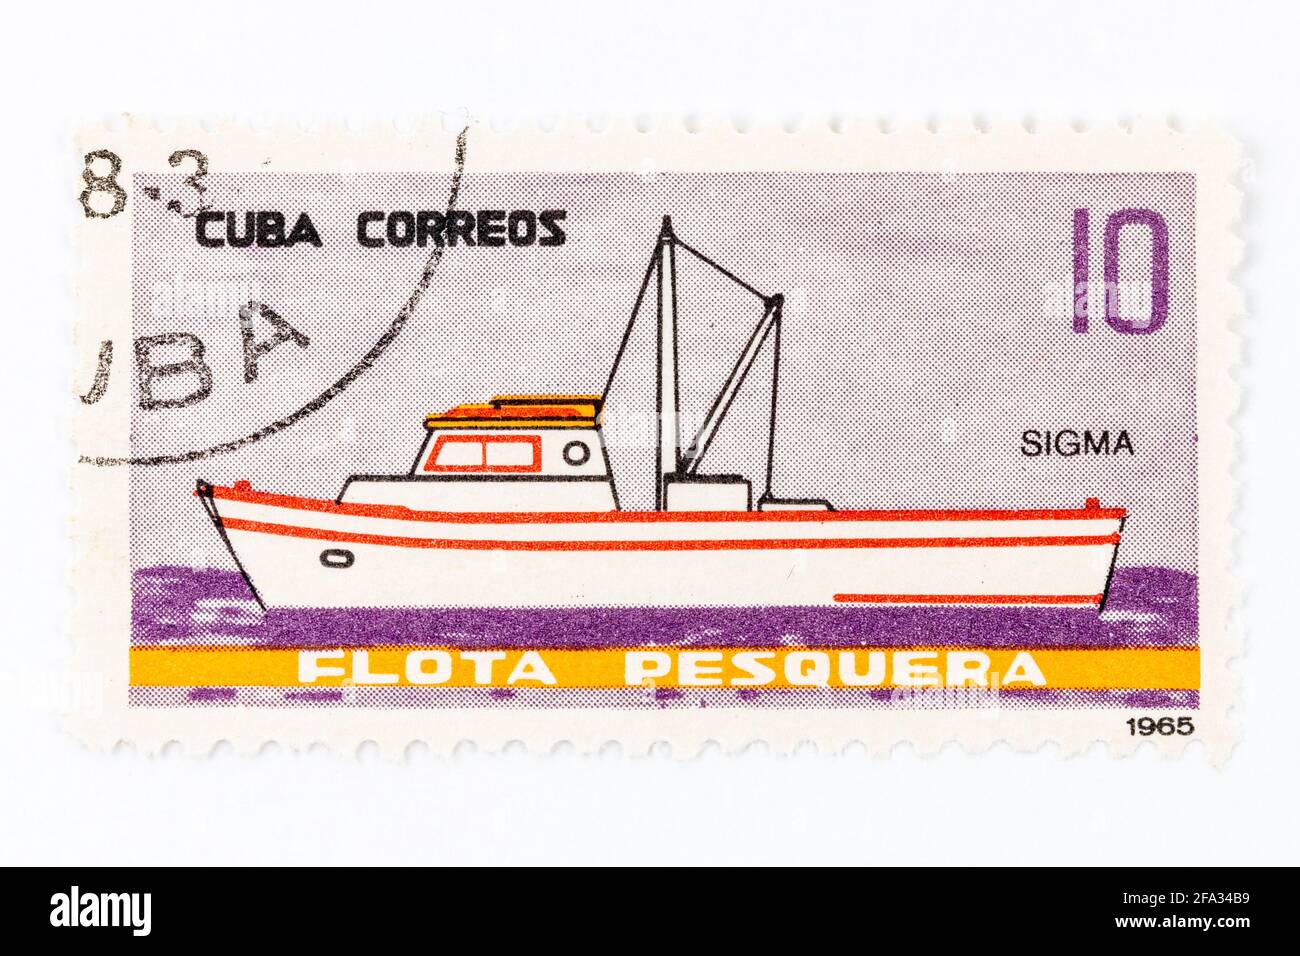 'Cuba Correos' antique postage stamp themed in the fishing fleet of the country. Date of emission 1965. Ship named 'Sigma' Stock Photo